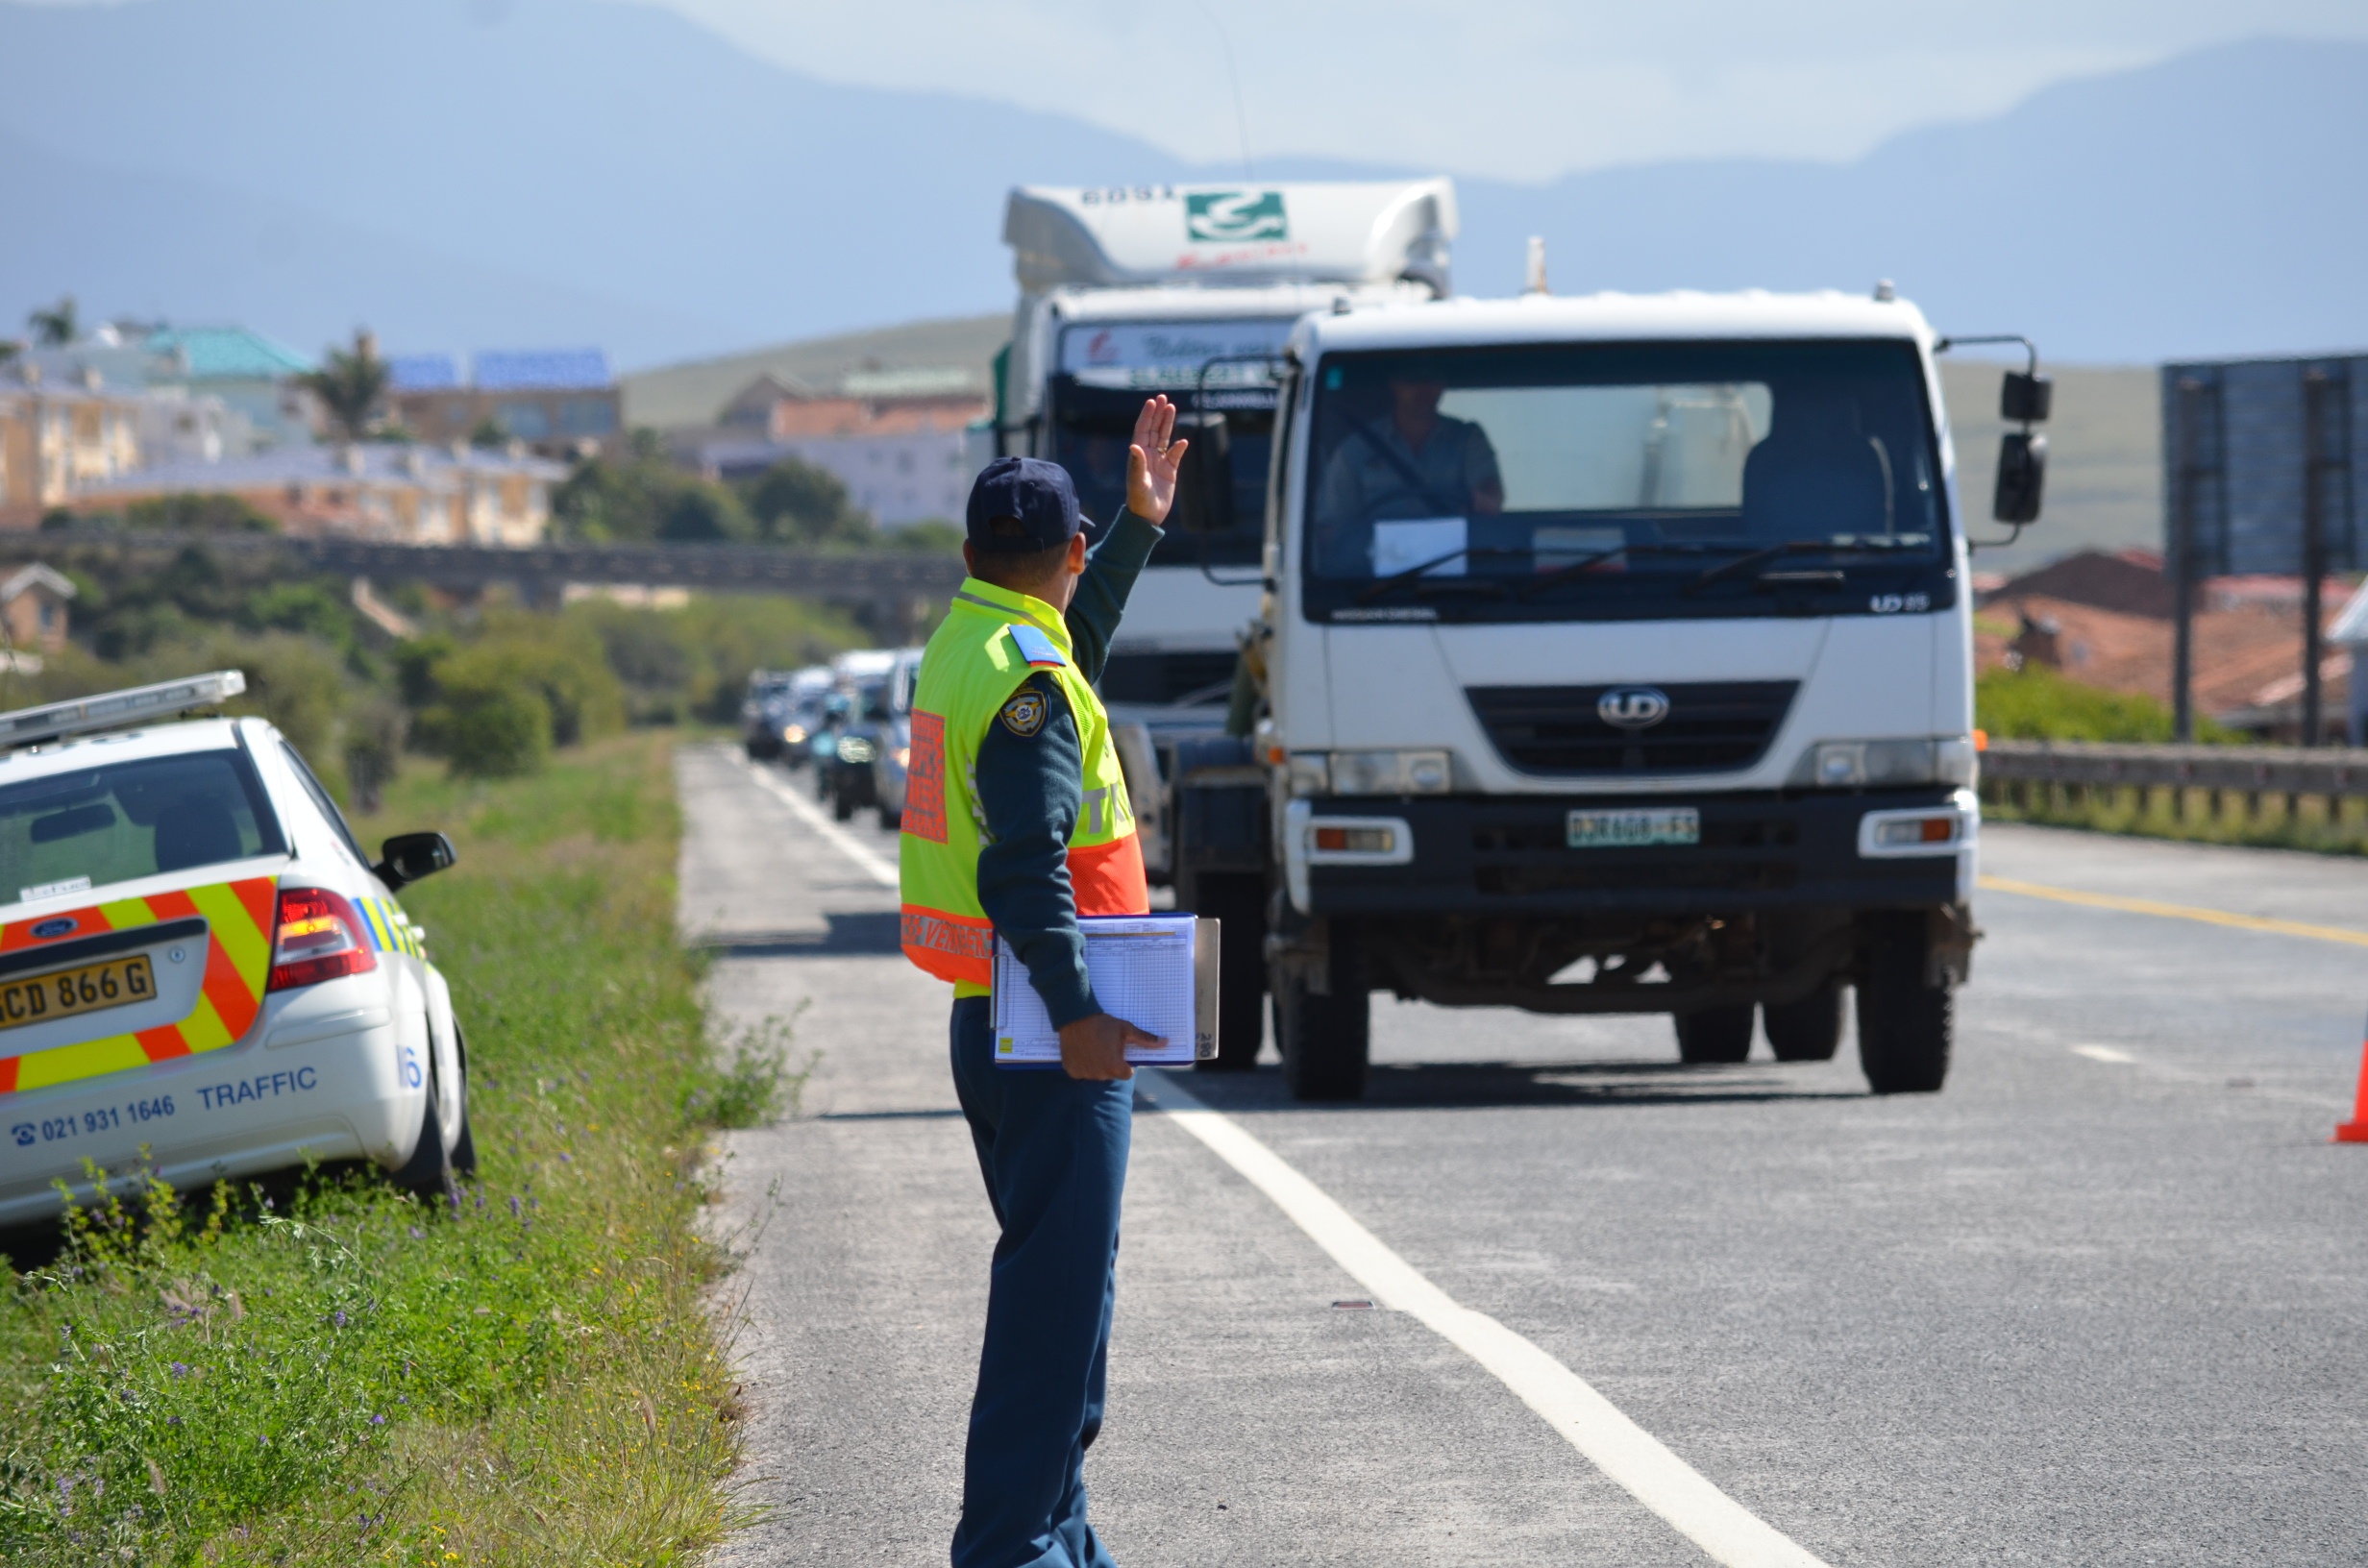 Effective traffic law enforcement is one of the most important contributors to road safety.